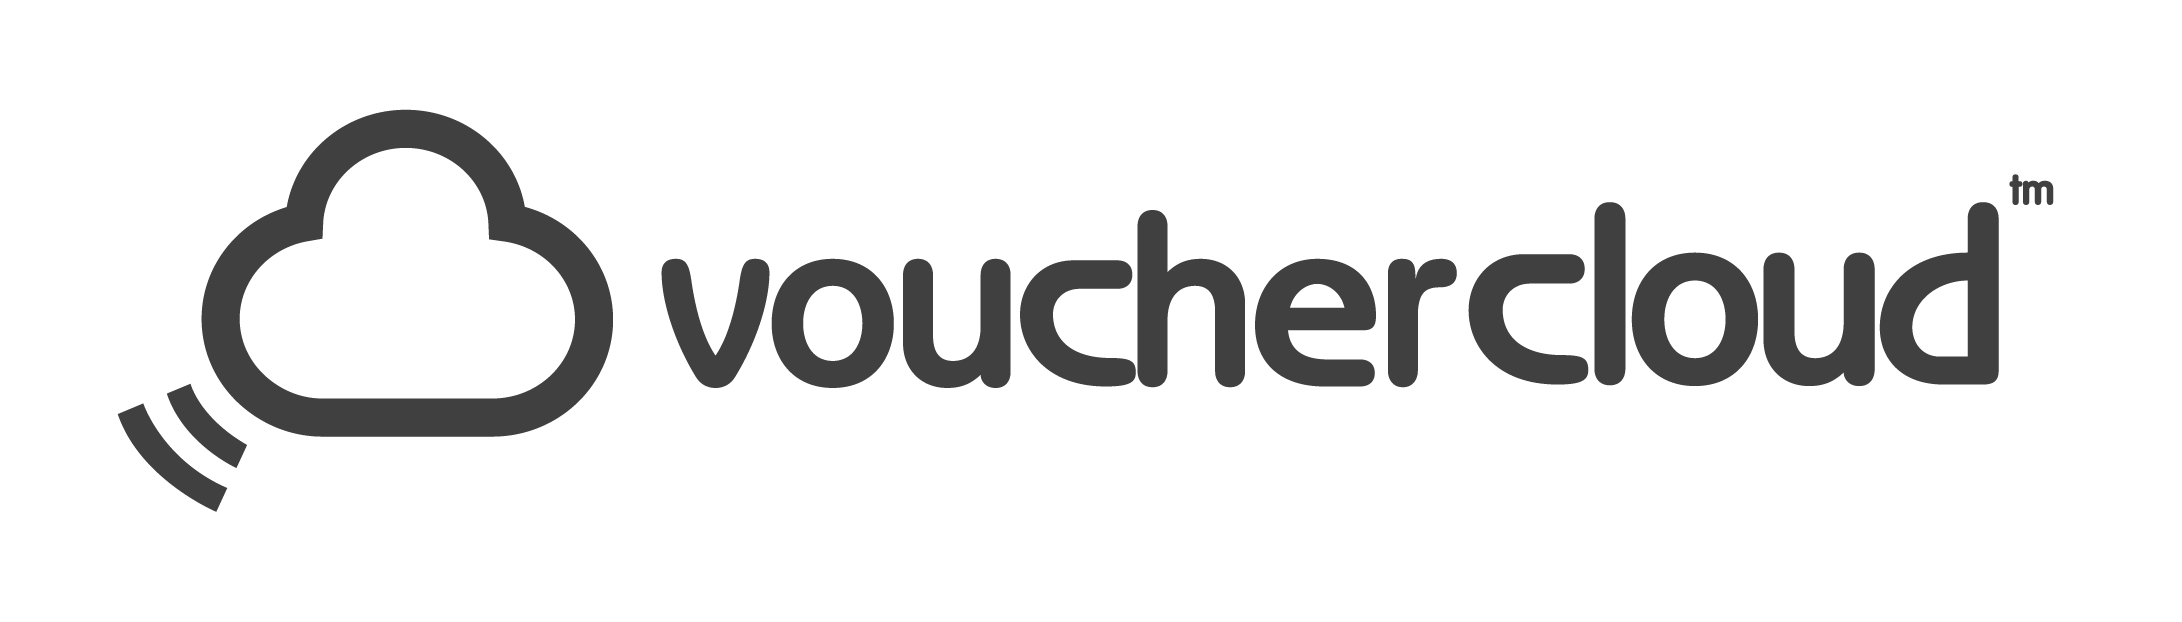 Press and Relations at vouchercloud